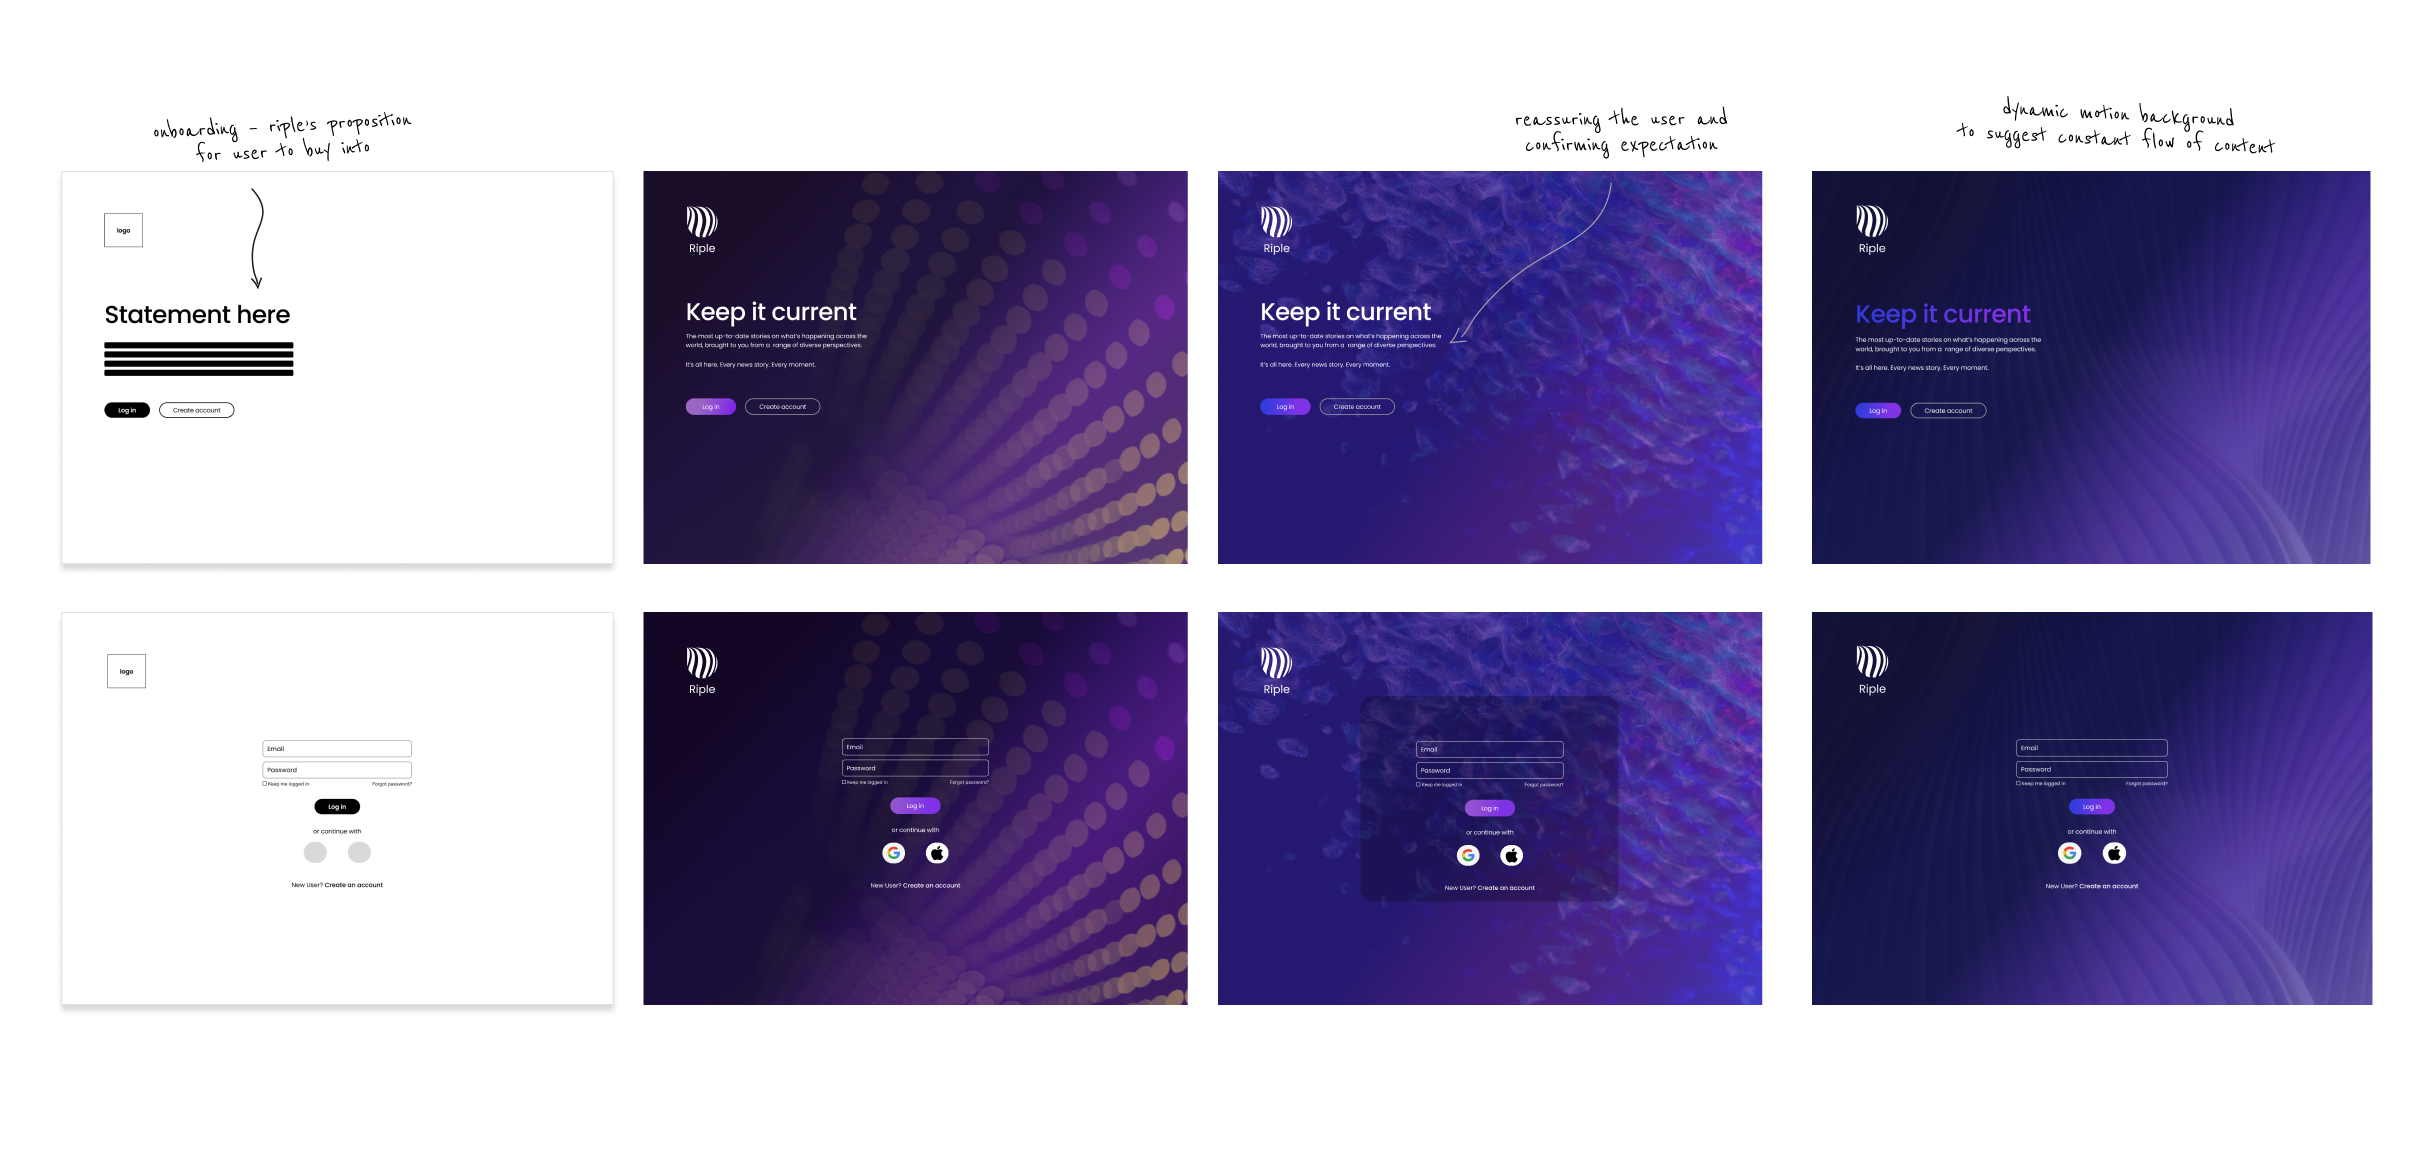 The landing page concepts for the Riple web app.